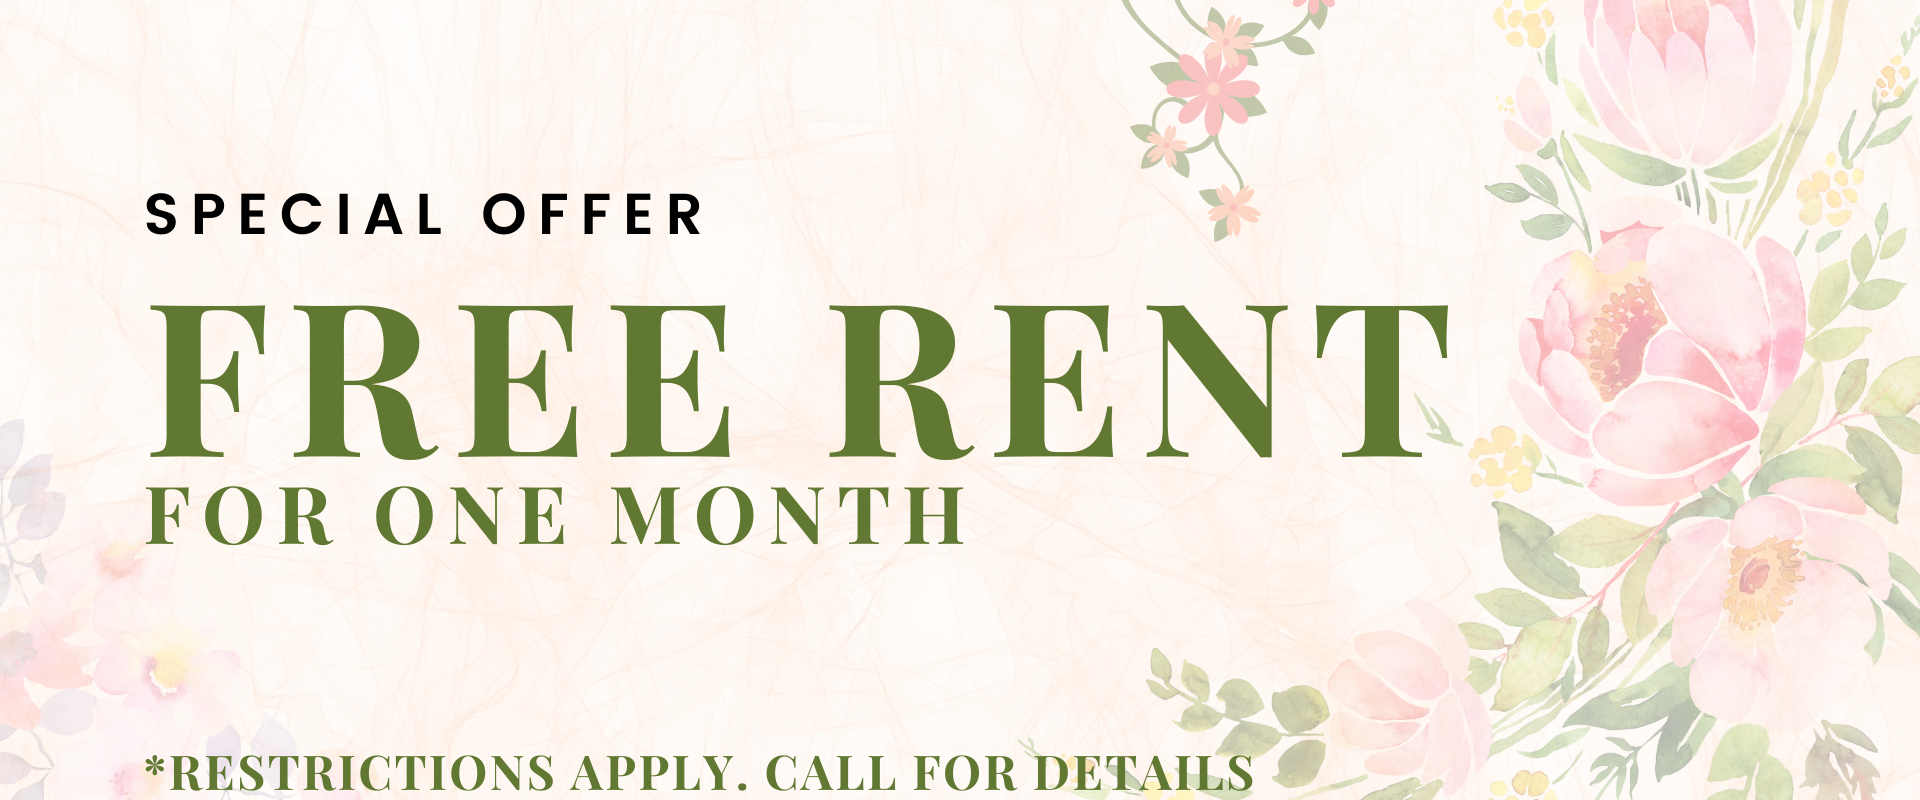 free rent for one month, restrictions apply, call for details